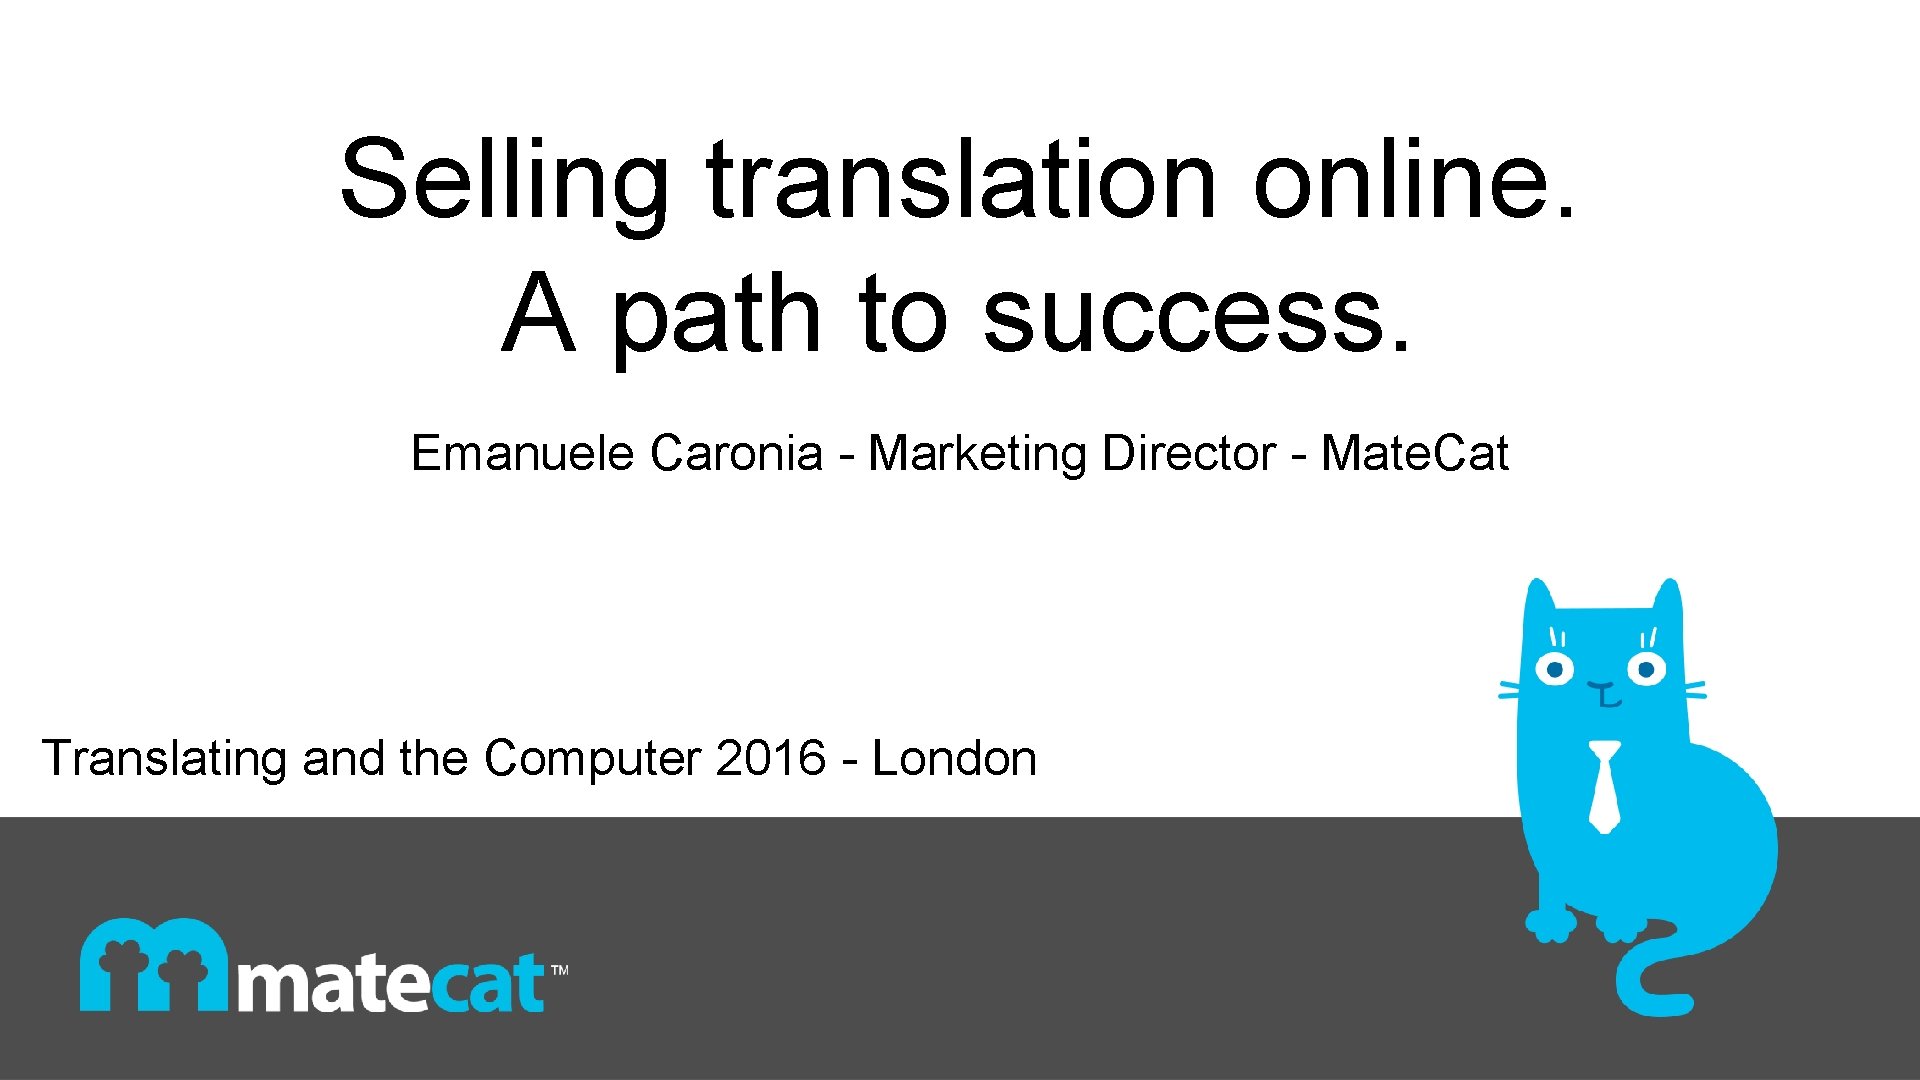 Selling translation online. A path to success. Emanuele Caronia - Marketing Director - Mate.